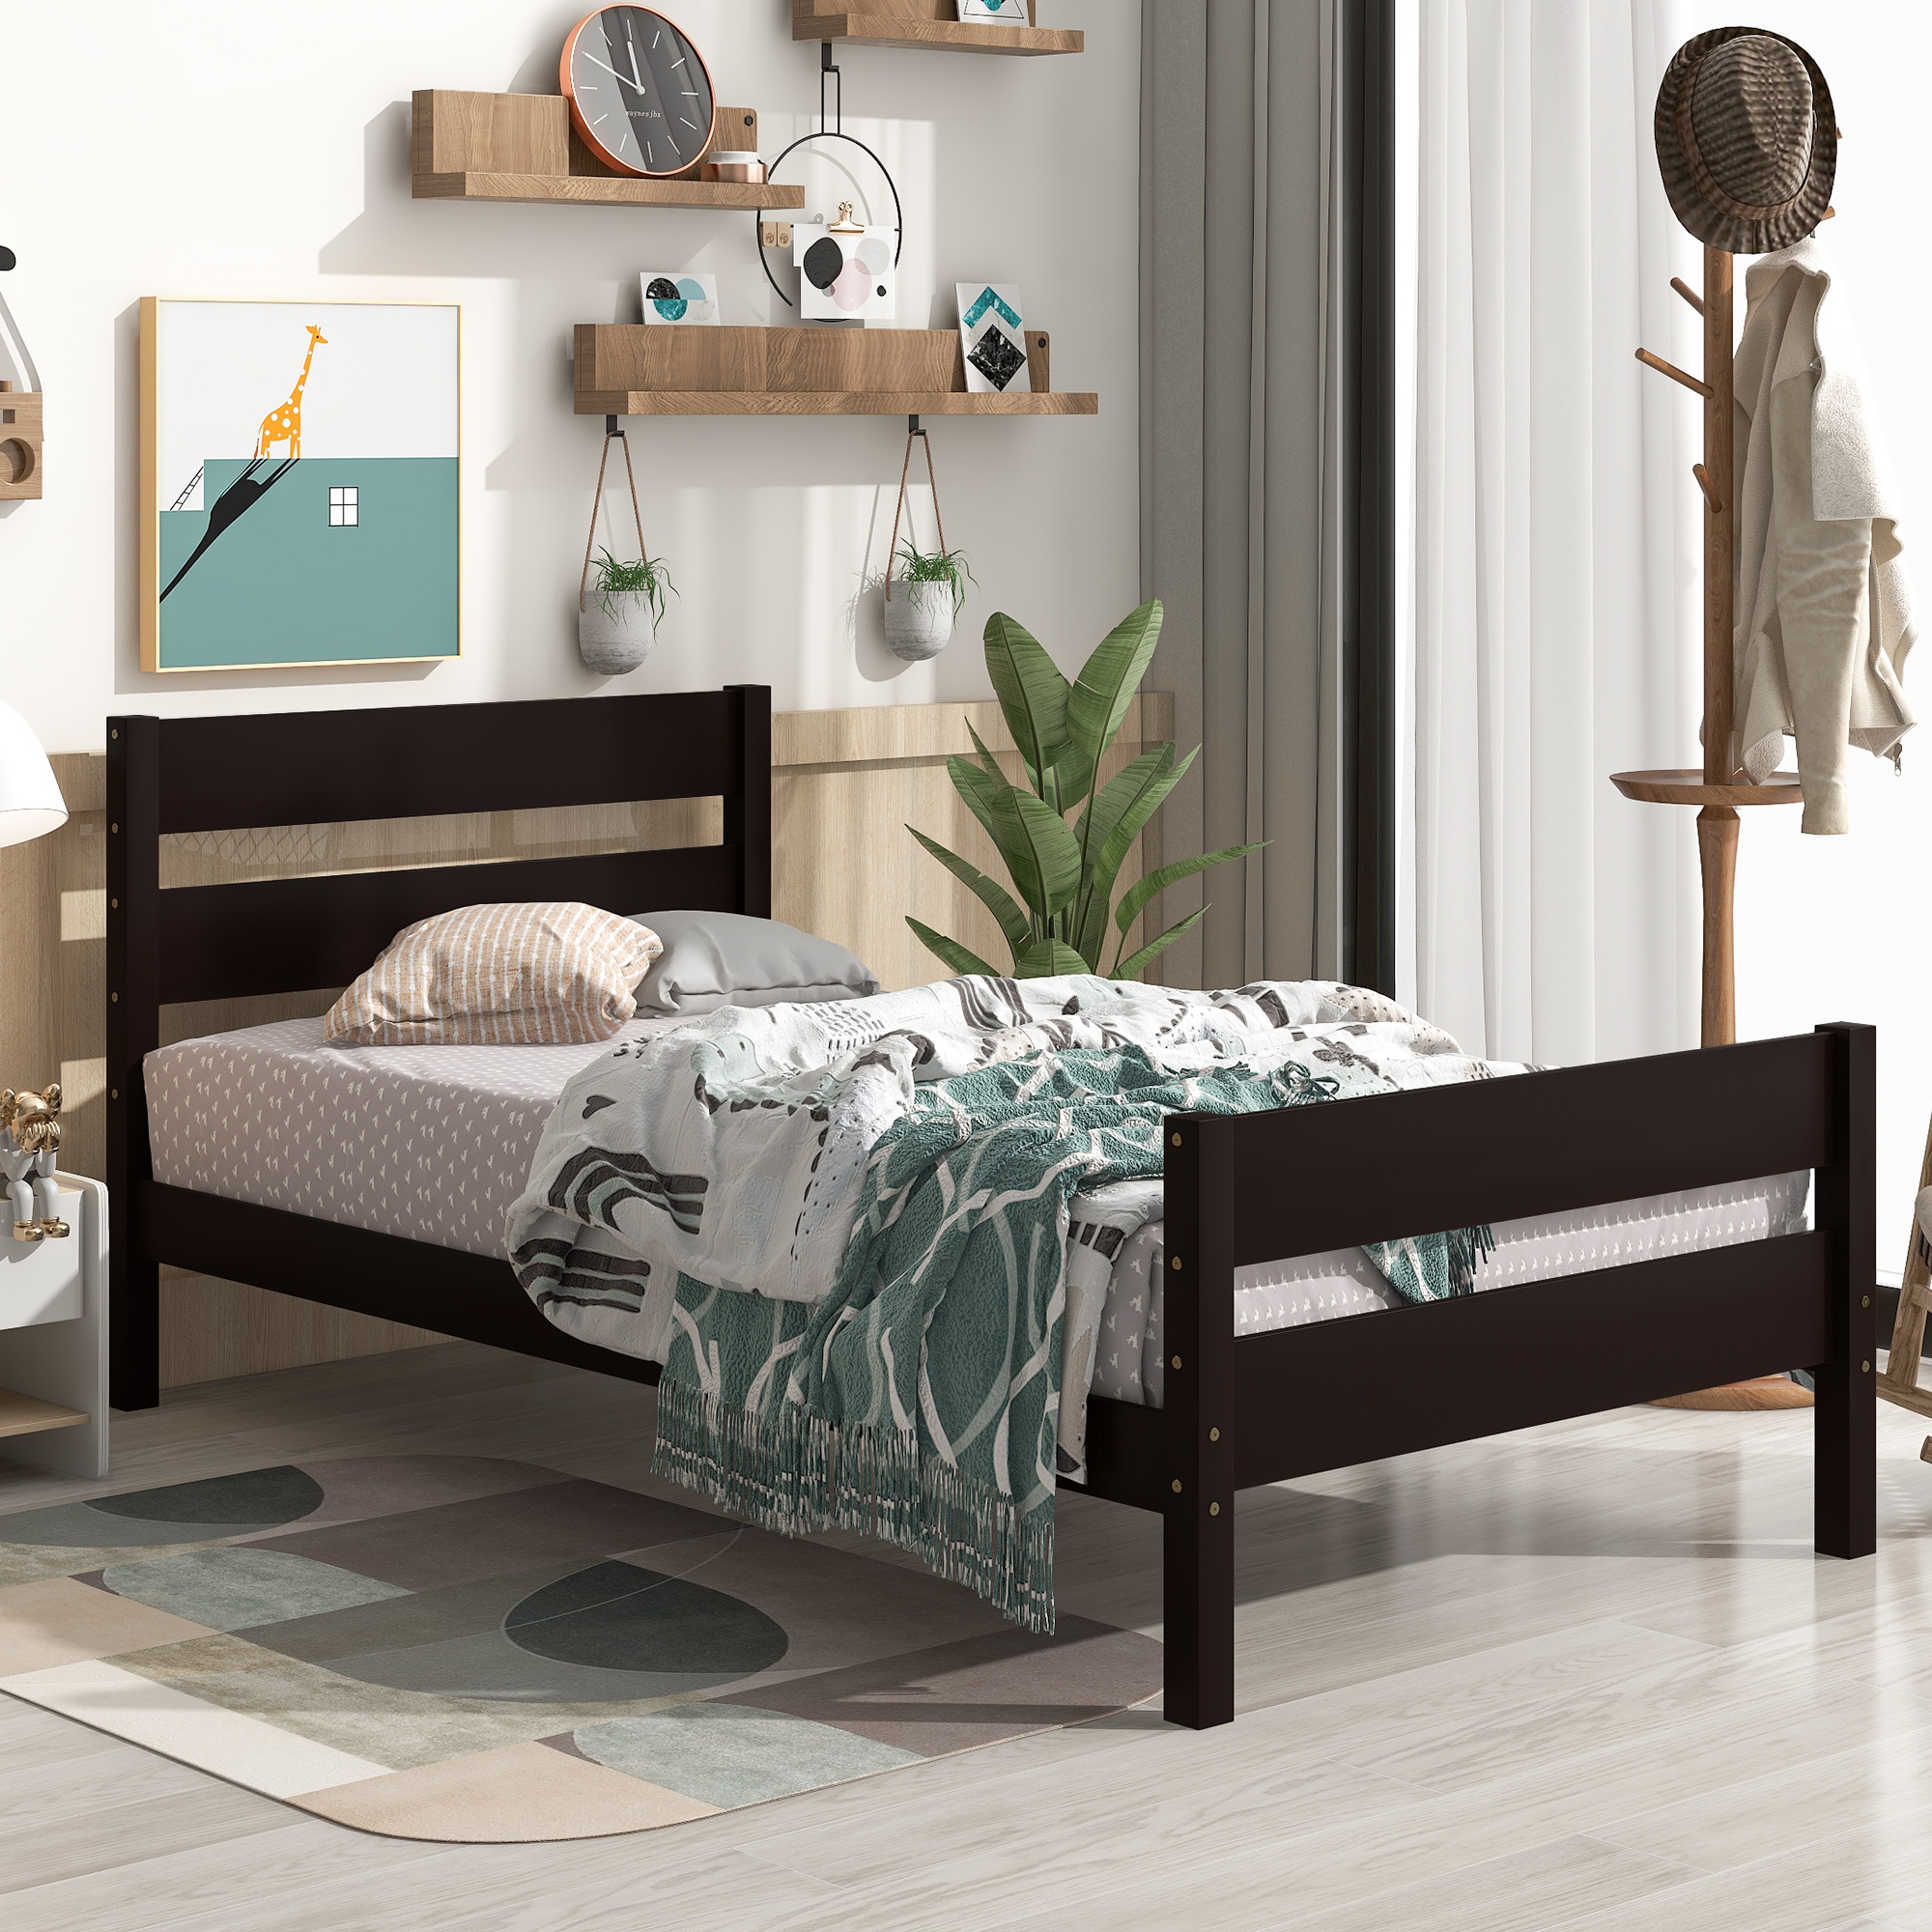 uhomepro Platform Bed Frame with Headboard and Footboard, Modern Twin Bed Frames for Kids, Heavy Duty Pine Wood Twin Size Bedroom Furniture with Wood Slats Support, No Box Spring Needed, Espresso - image 1 of 12